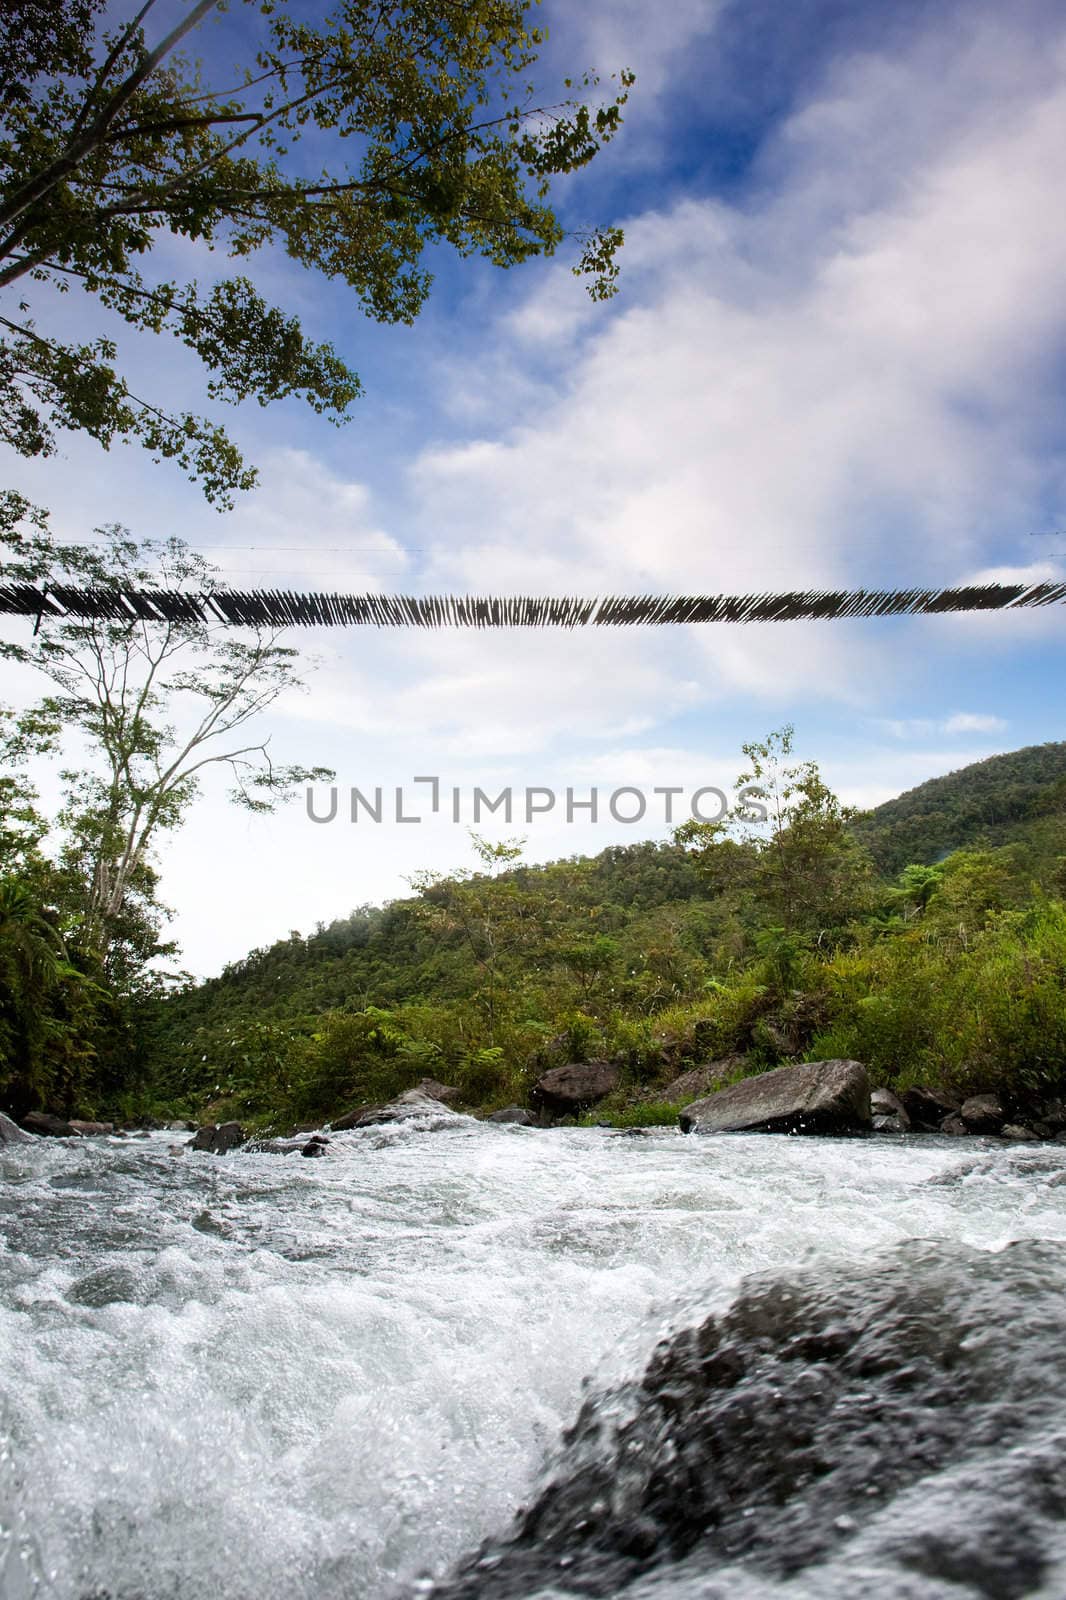 A hanging bridge over a rapid flowing stream